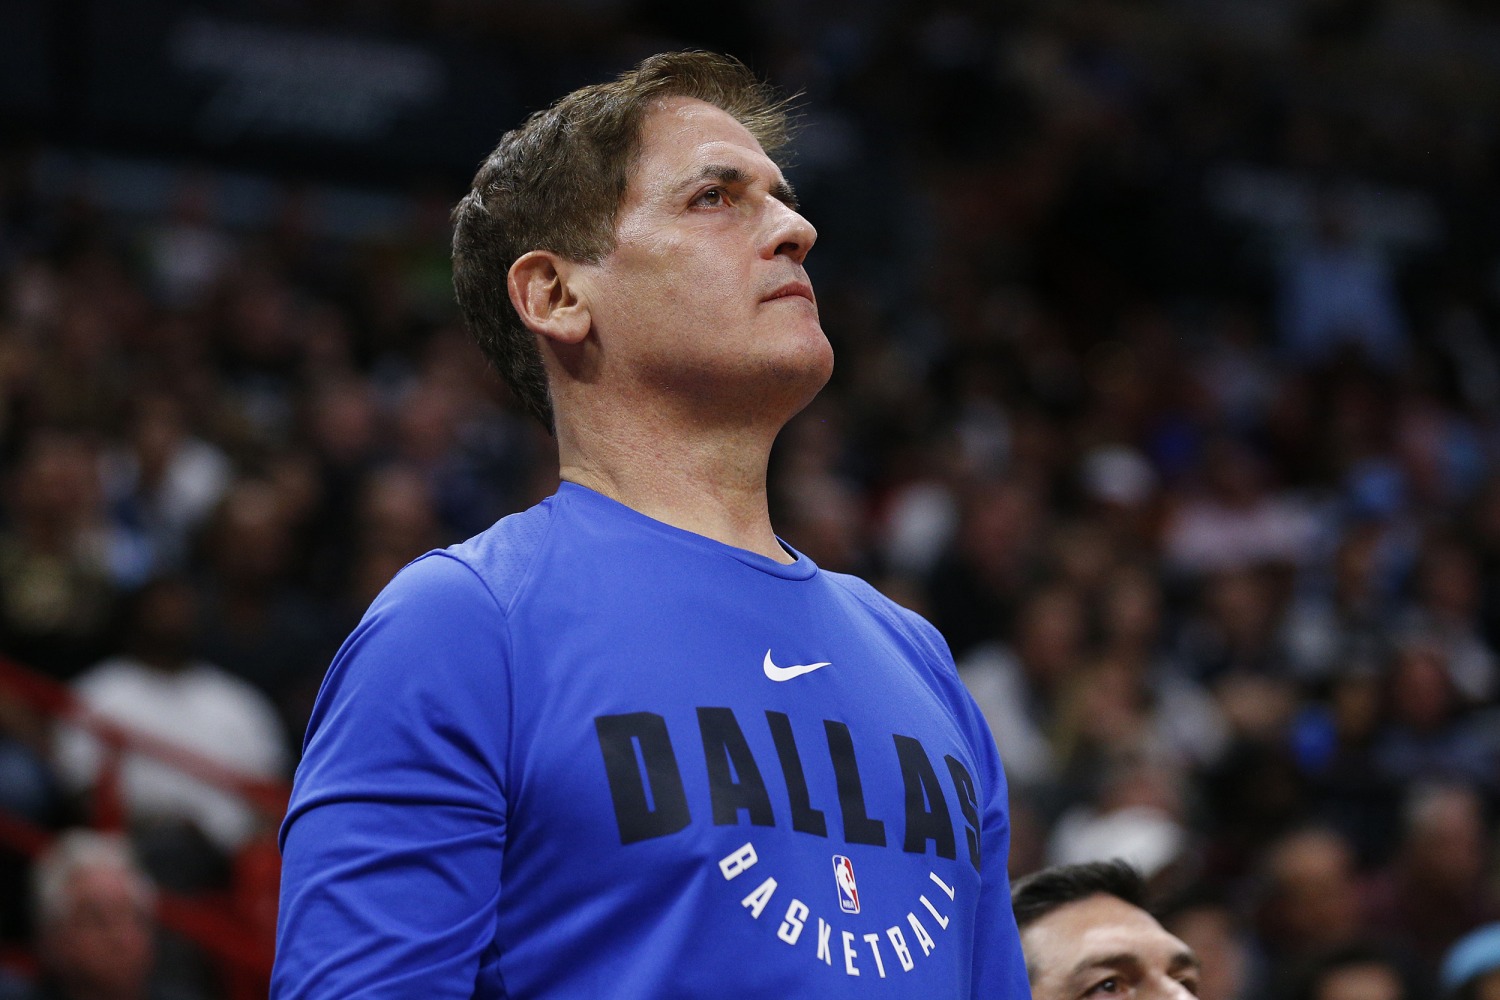 This should happen everywhere': Rival NBA coach backs Mark Cuban's move to  end anthem before Mavericks games